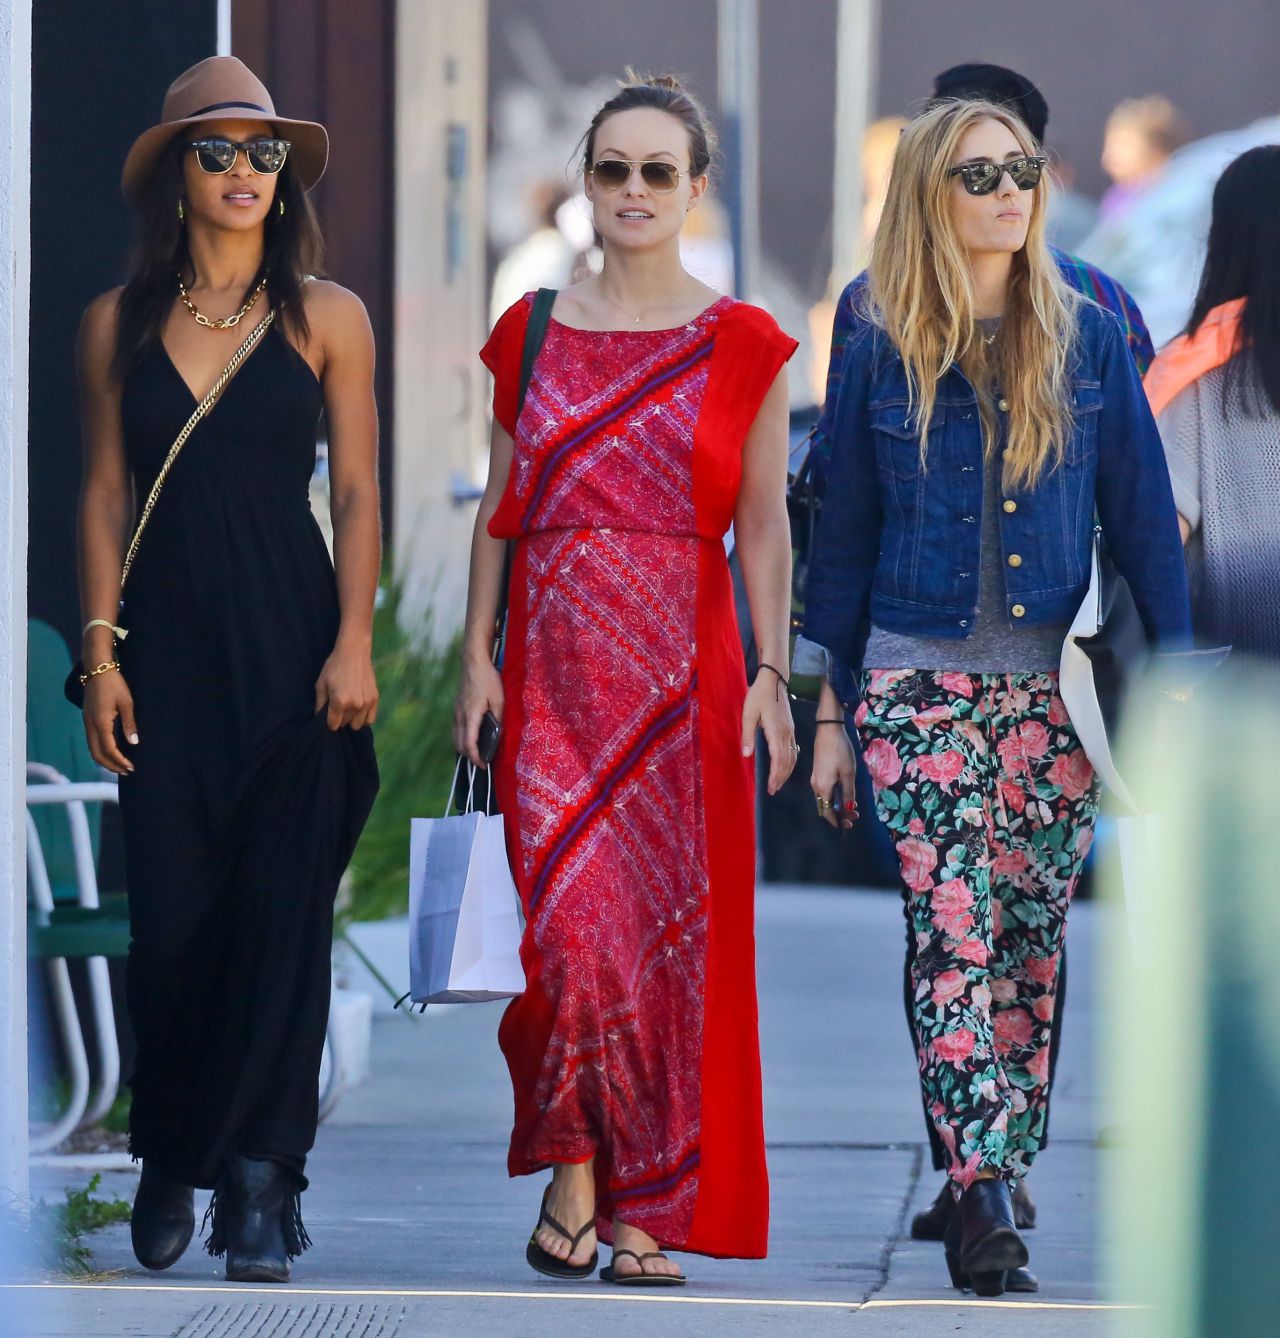 Olivia Wilde Street Style - With her Girlfriends in West Hollywood, February 2014